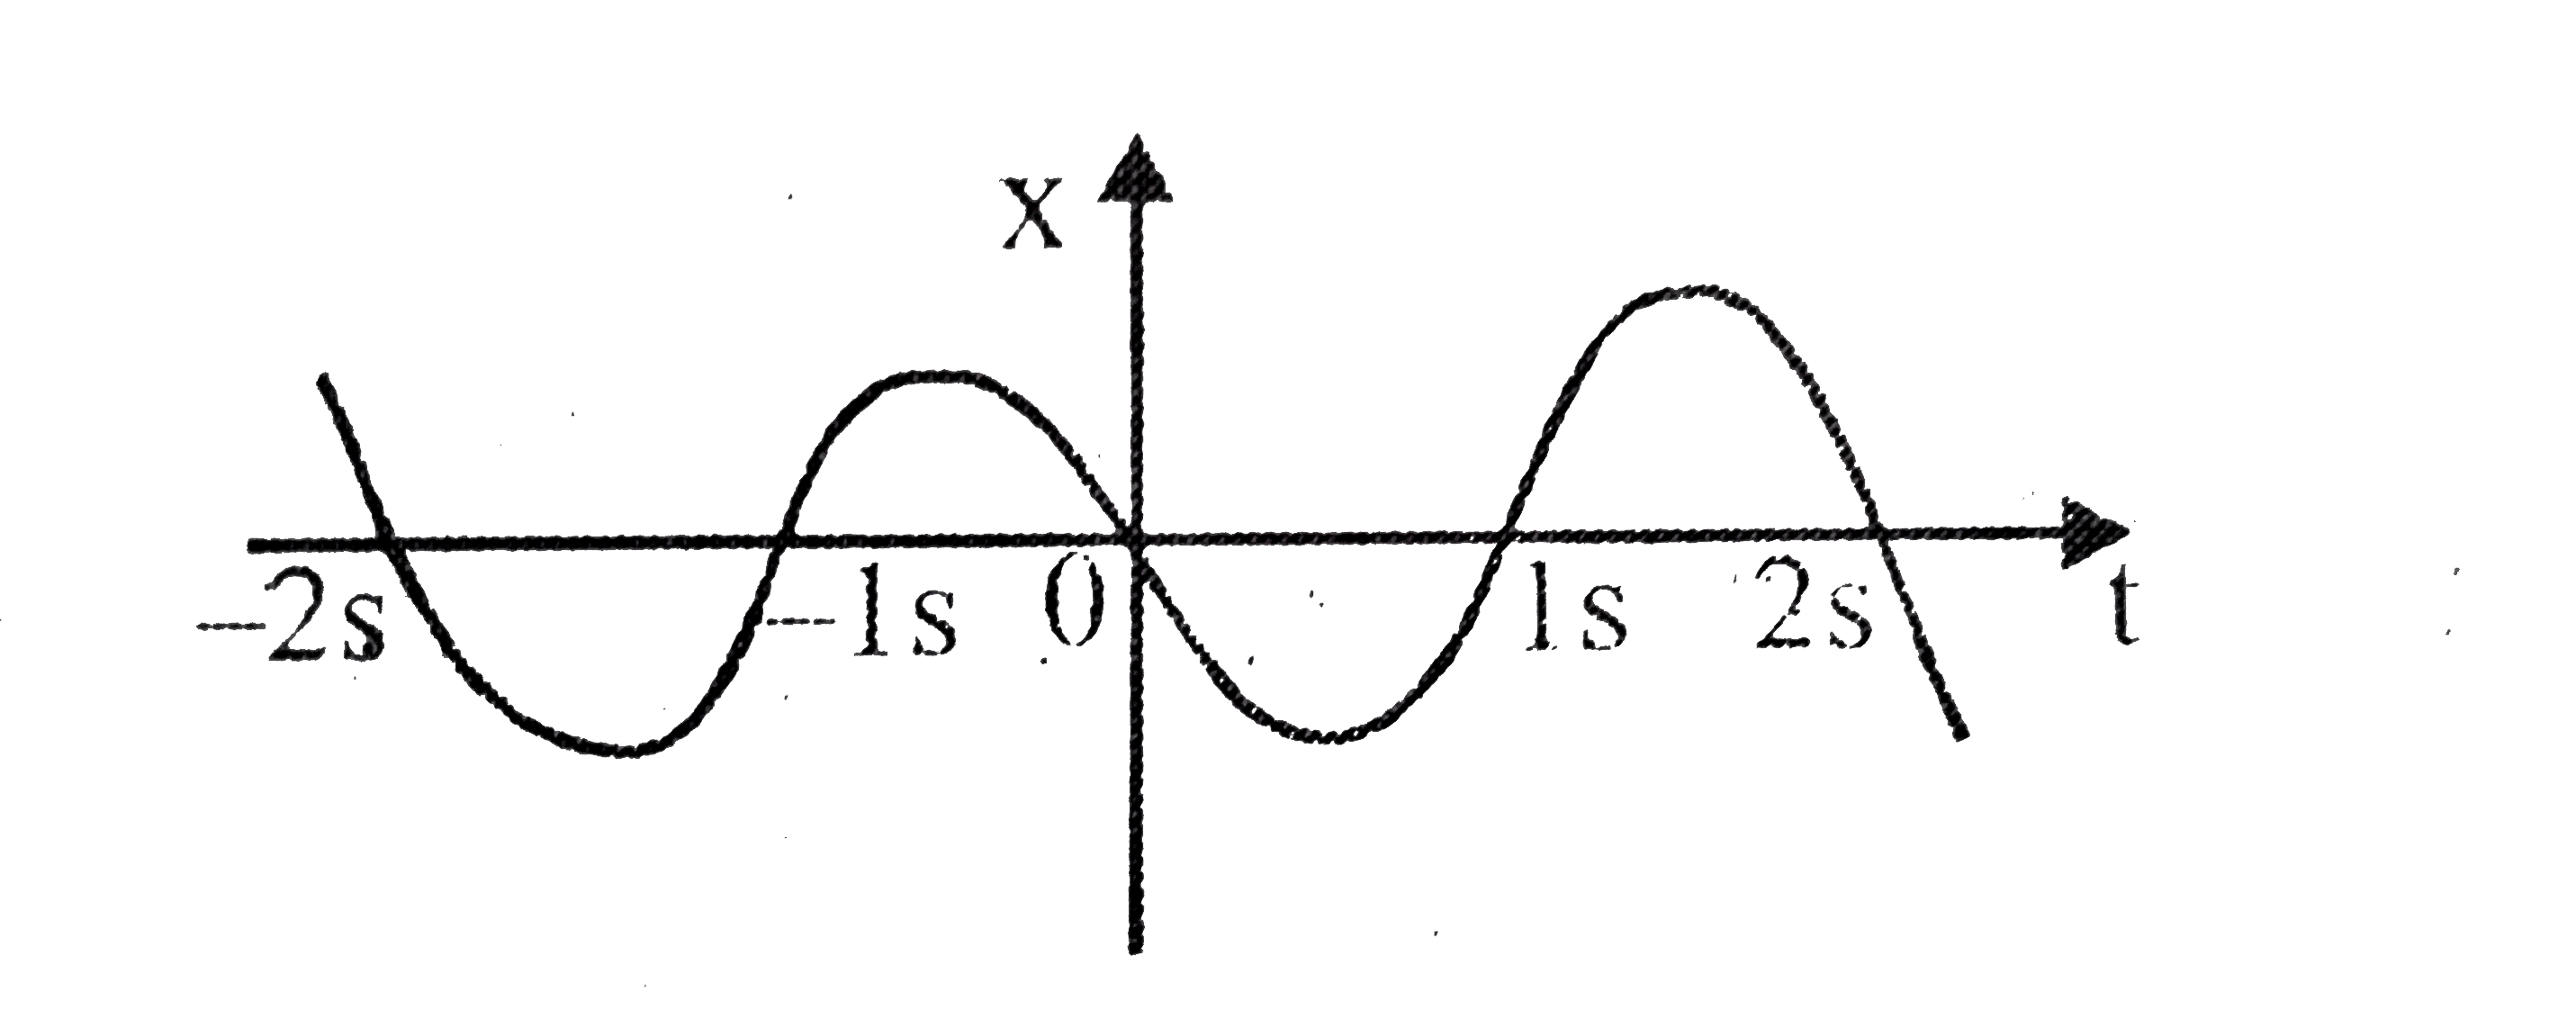 Figure gives the x-t plot of a particle is one dimensional motion. Give the signs of position, velocity and acceleration of the particle at t = 0.3s